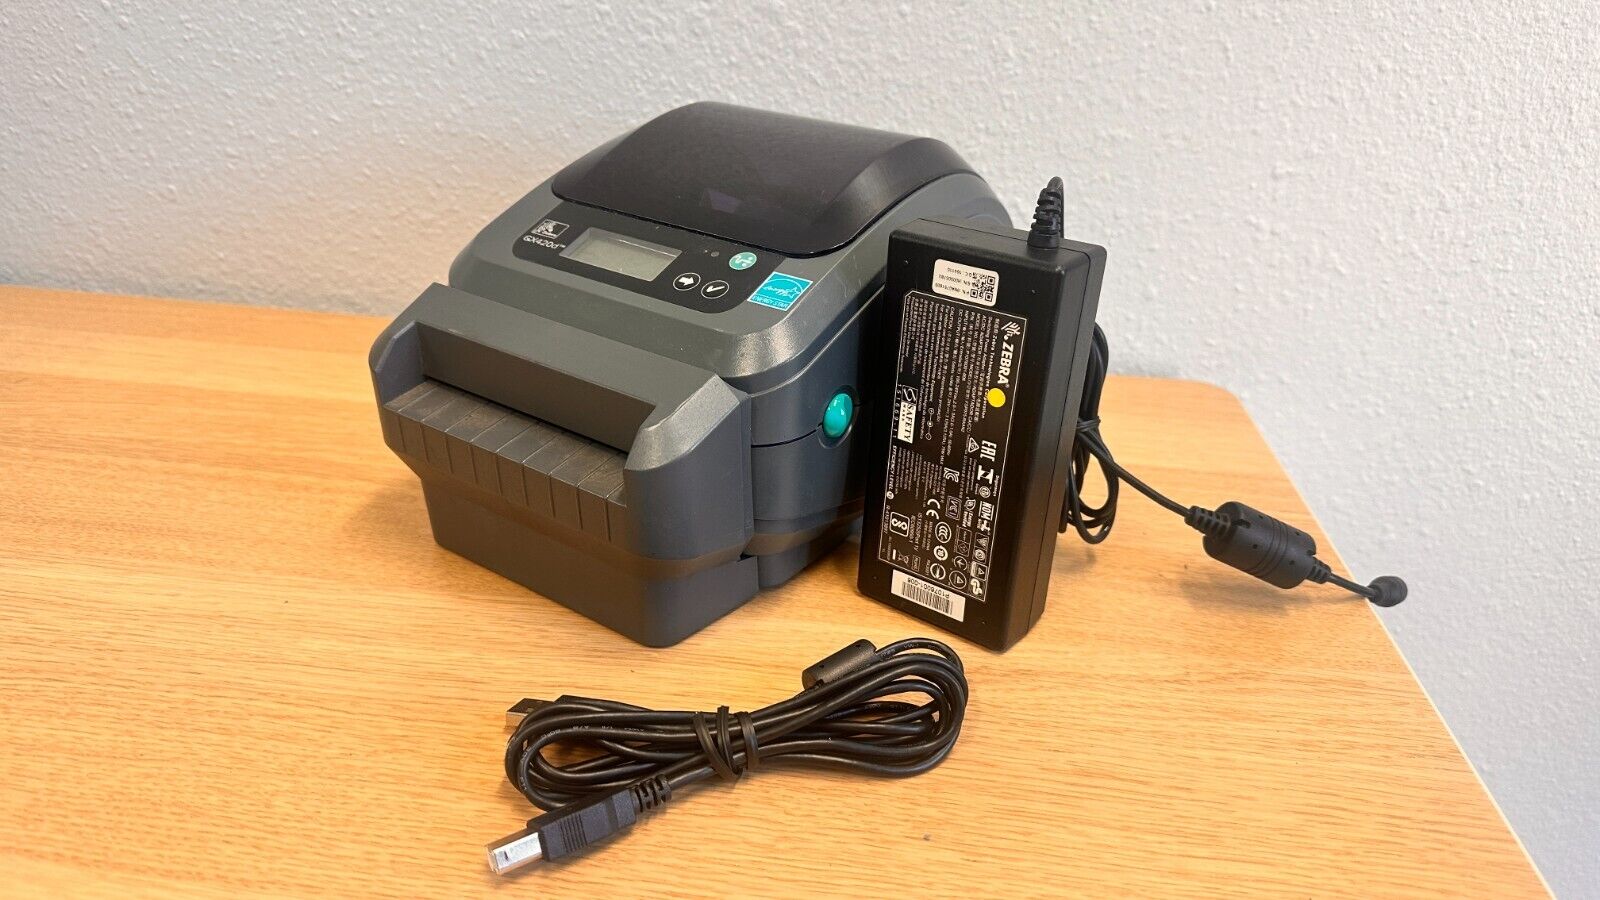 Zebra ZP450 Direct Thermal Label Printer with USB, Parallel and Serial Port (NP)